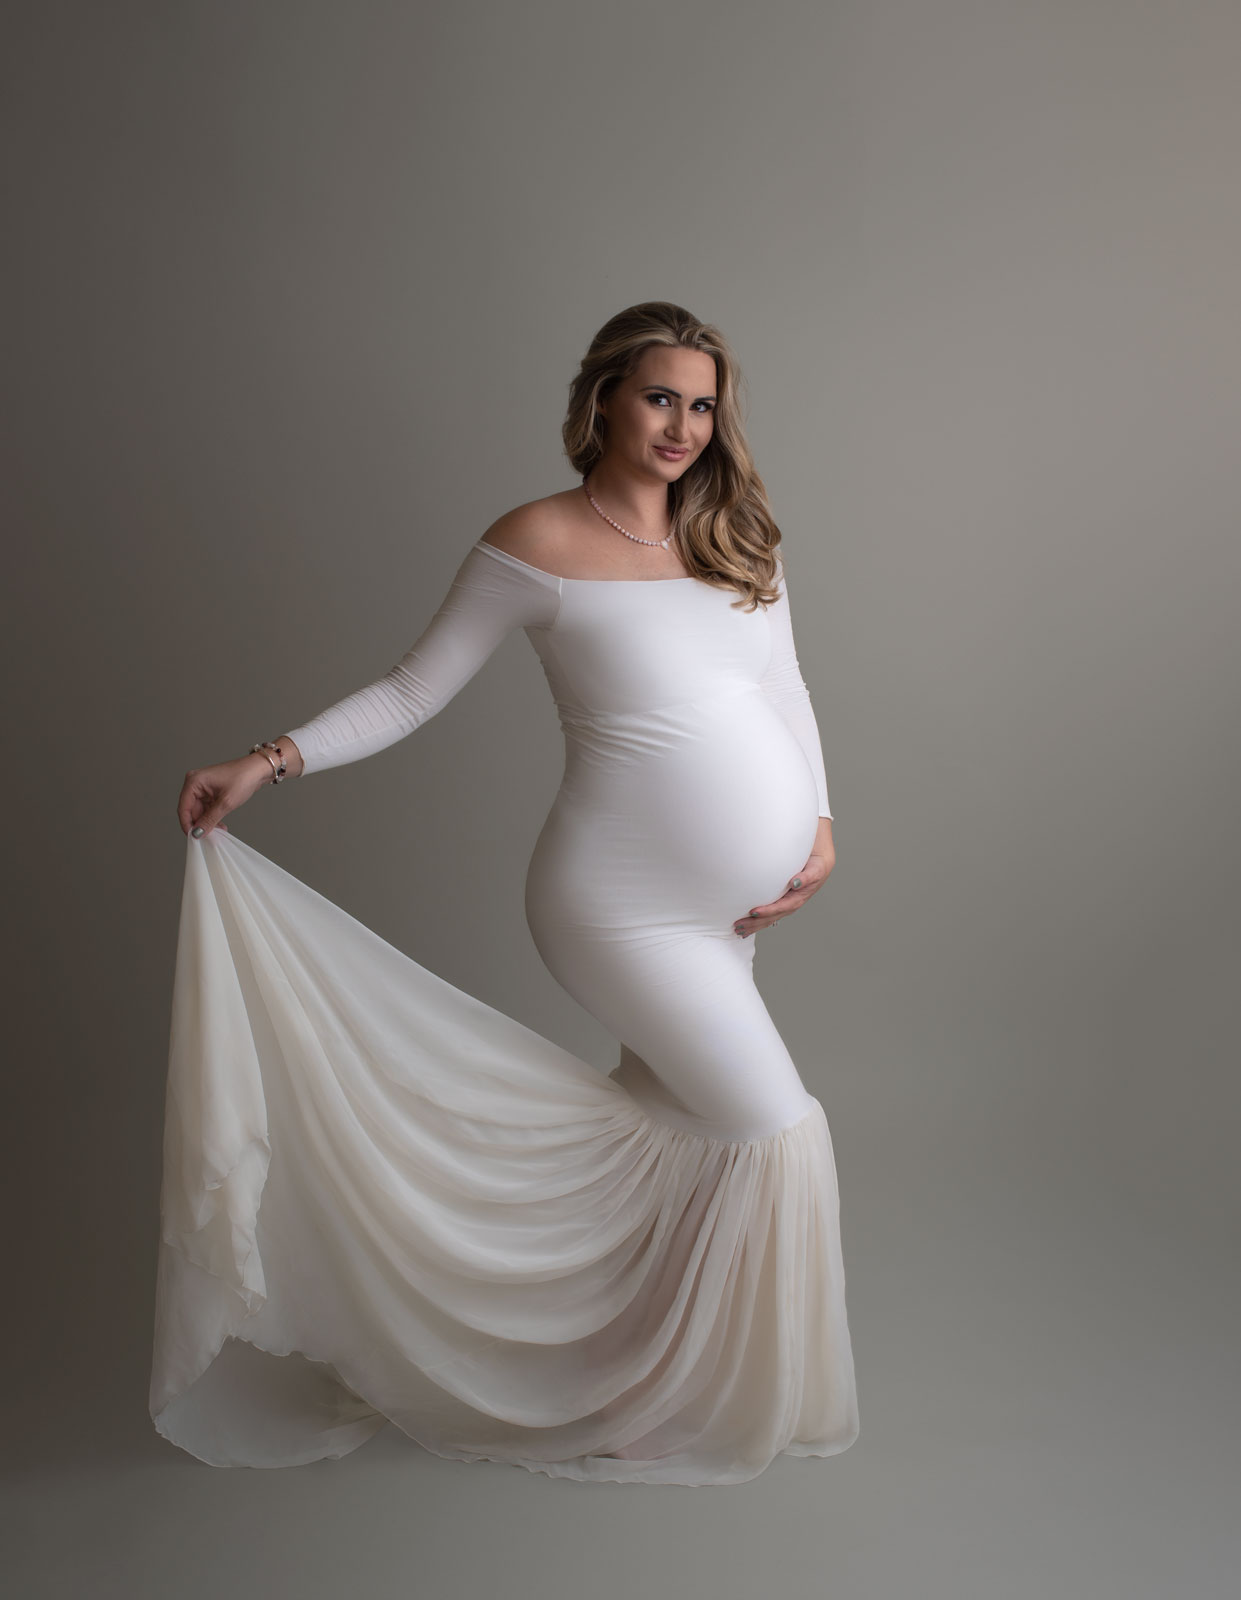 A mother-to-be stands in a white maternity gown with a long train